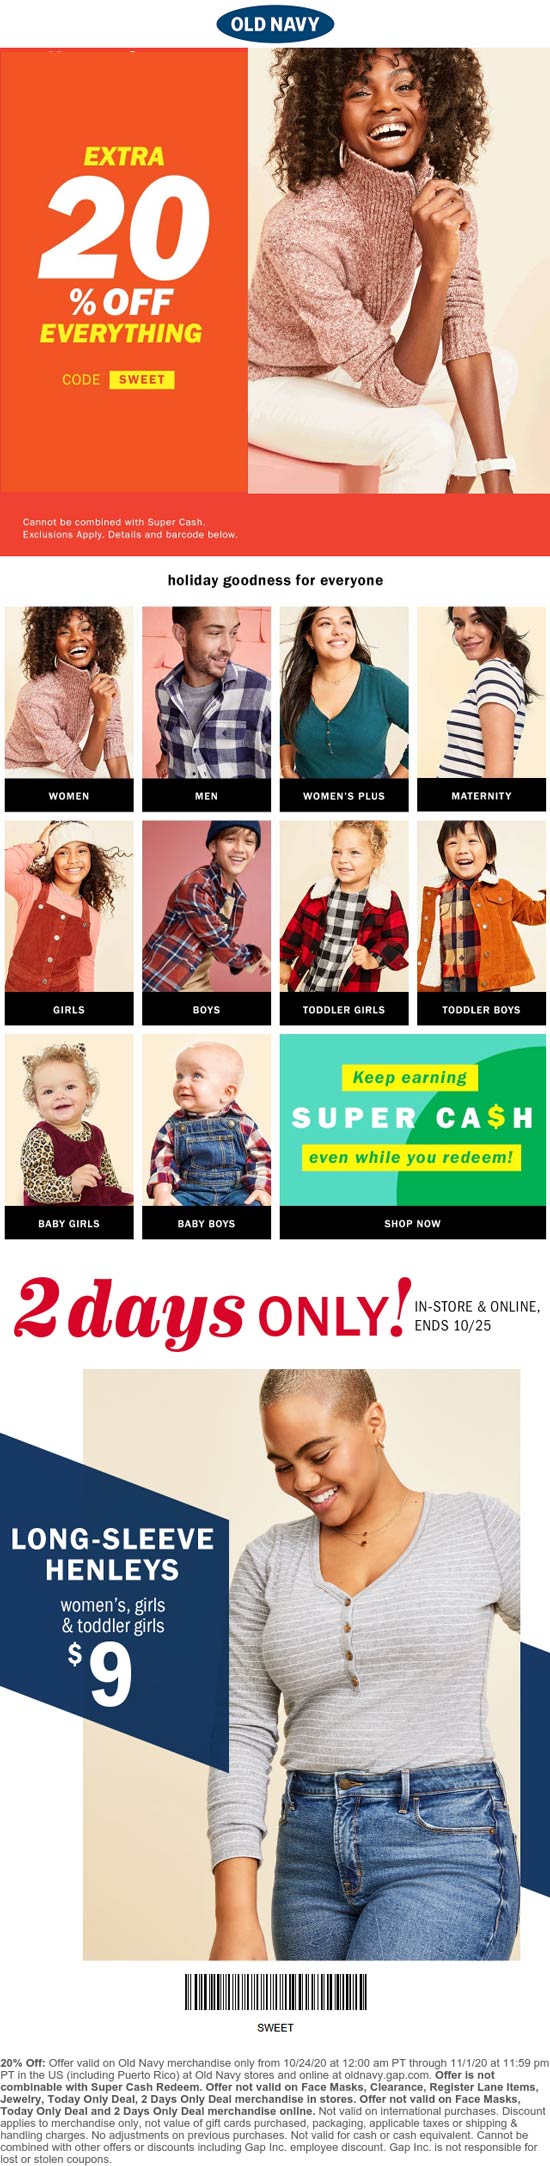 Old Navy stores Coupon  Extra 20% off everything at Old Navy, or online via promo code SWEET #oldnavy 